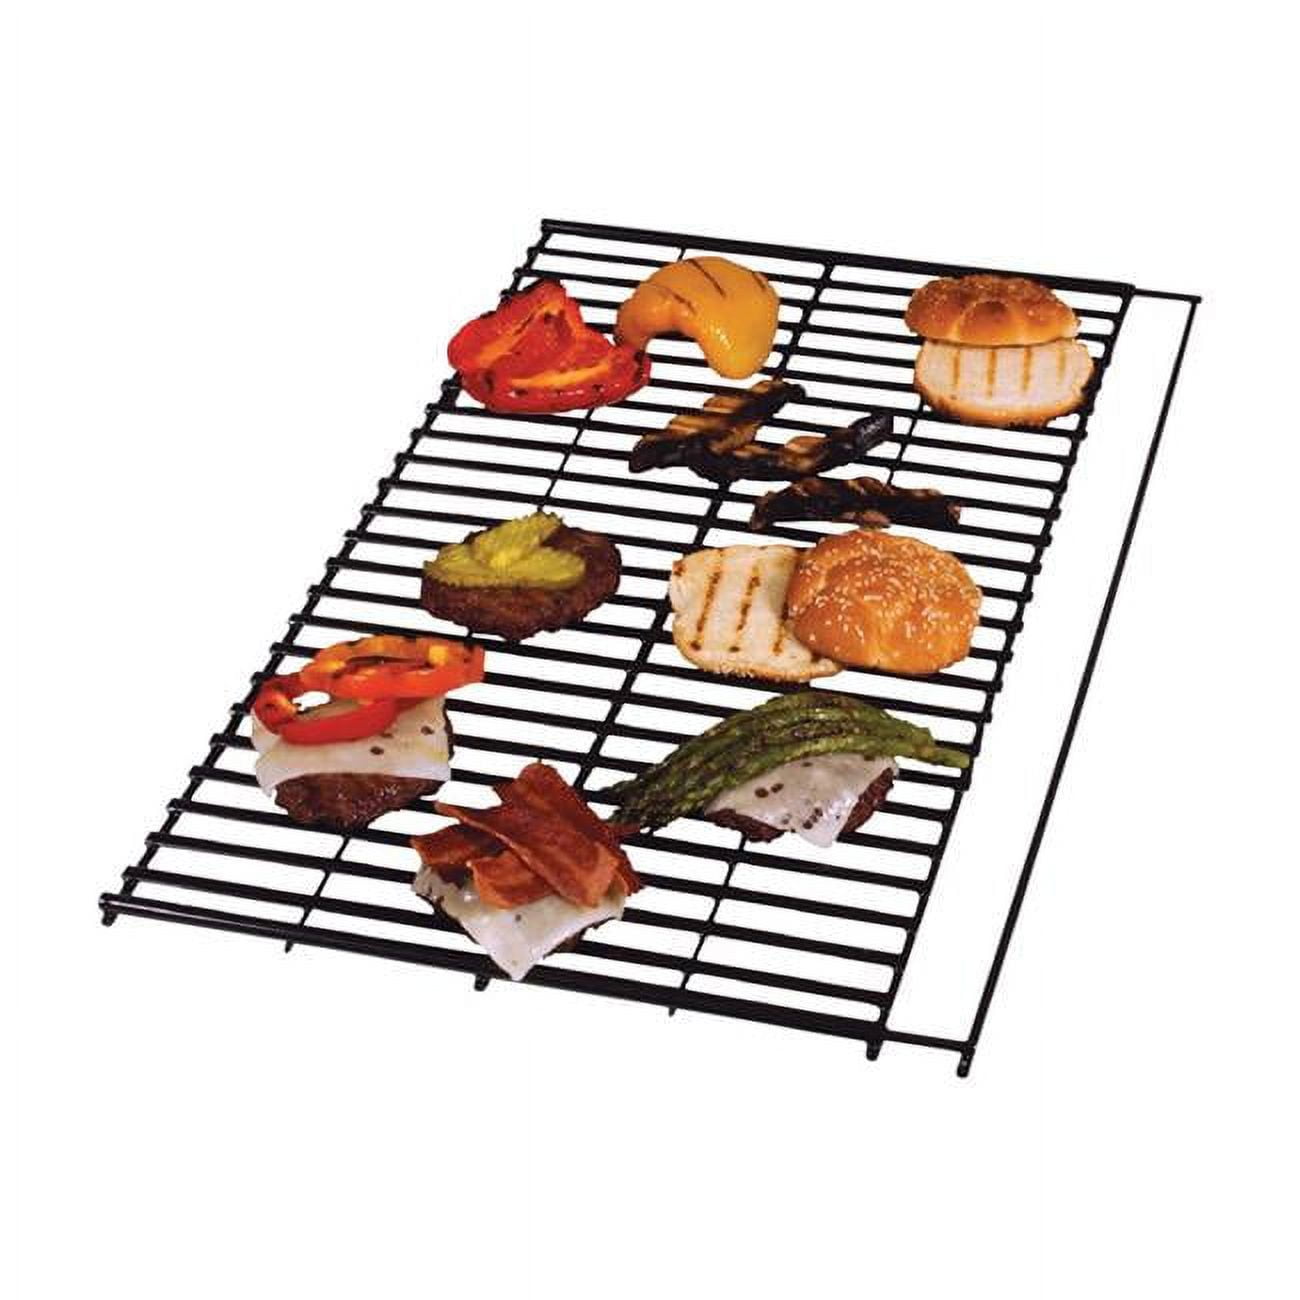 Char-Broil 8011459 Steel Porcelain Grill Grate, Black - 0.68 x 25 x 14.19 in.